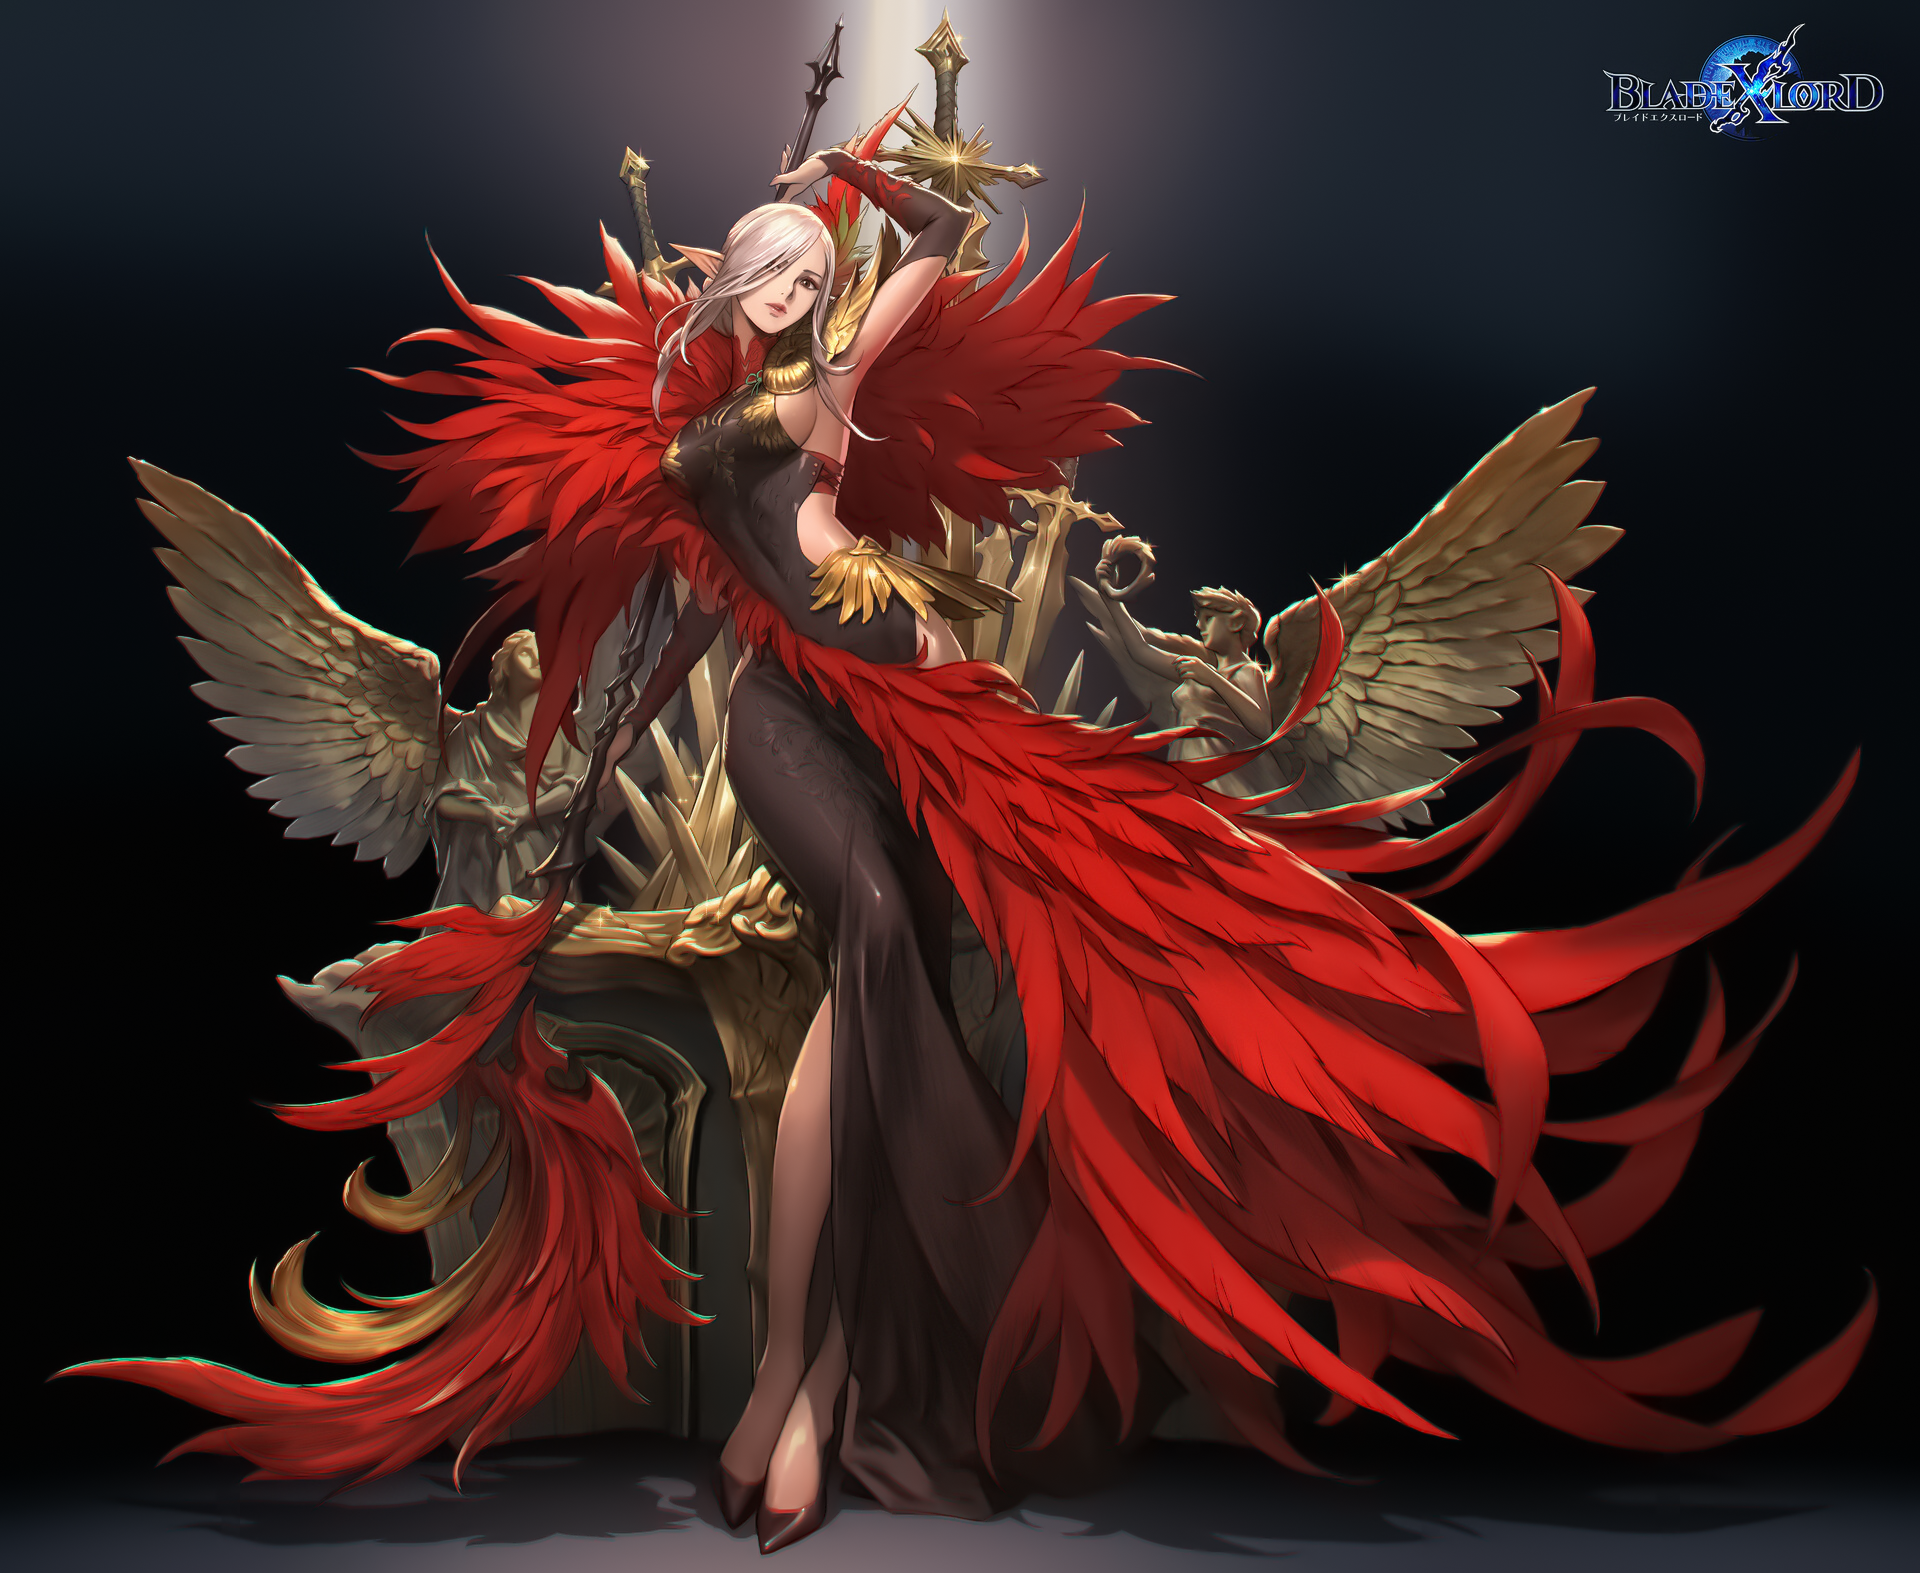 General 1920x1573 Bluezima drawing women elves blonde long hair feathers red clothing wings dress pointy ears weapon sword lights